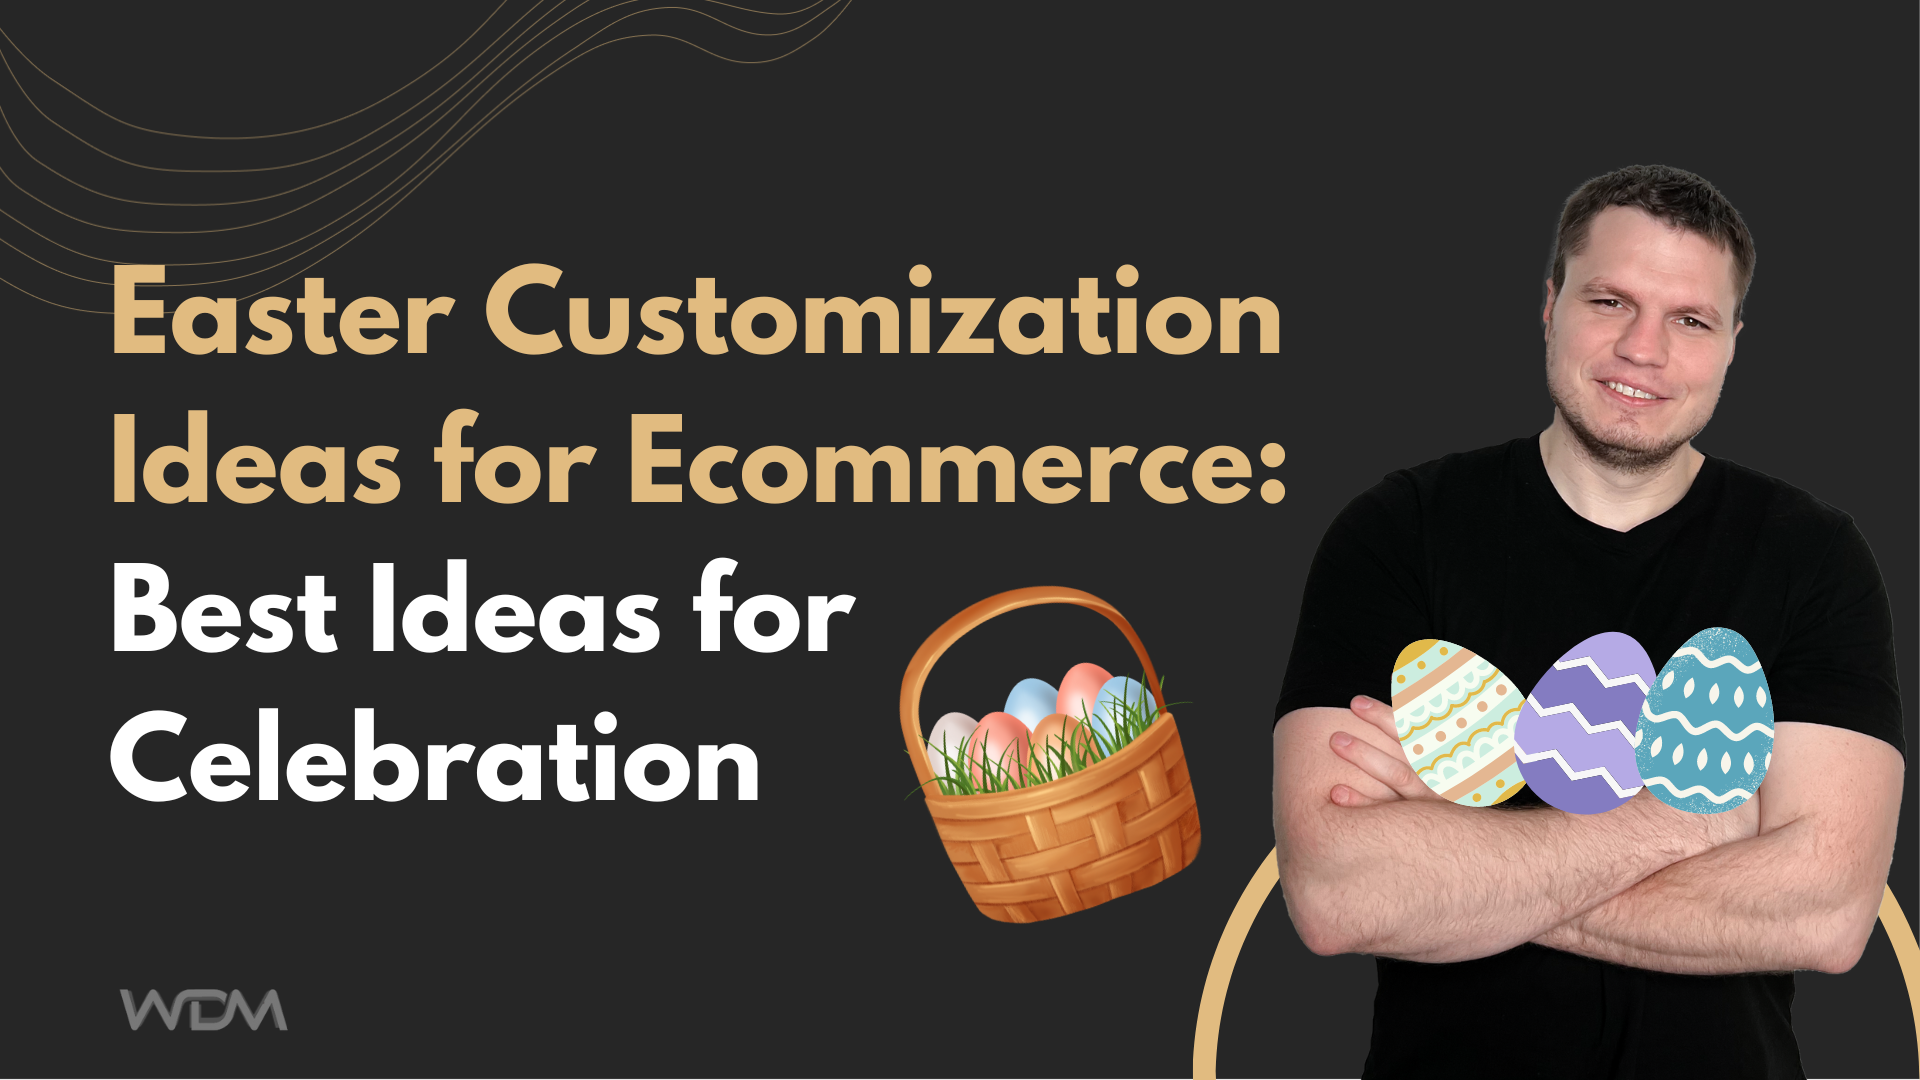 Easter Customization Ideas for Ecommerce